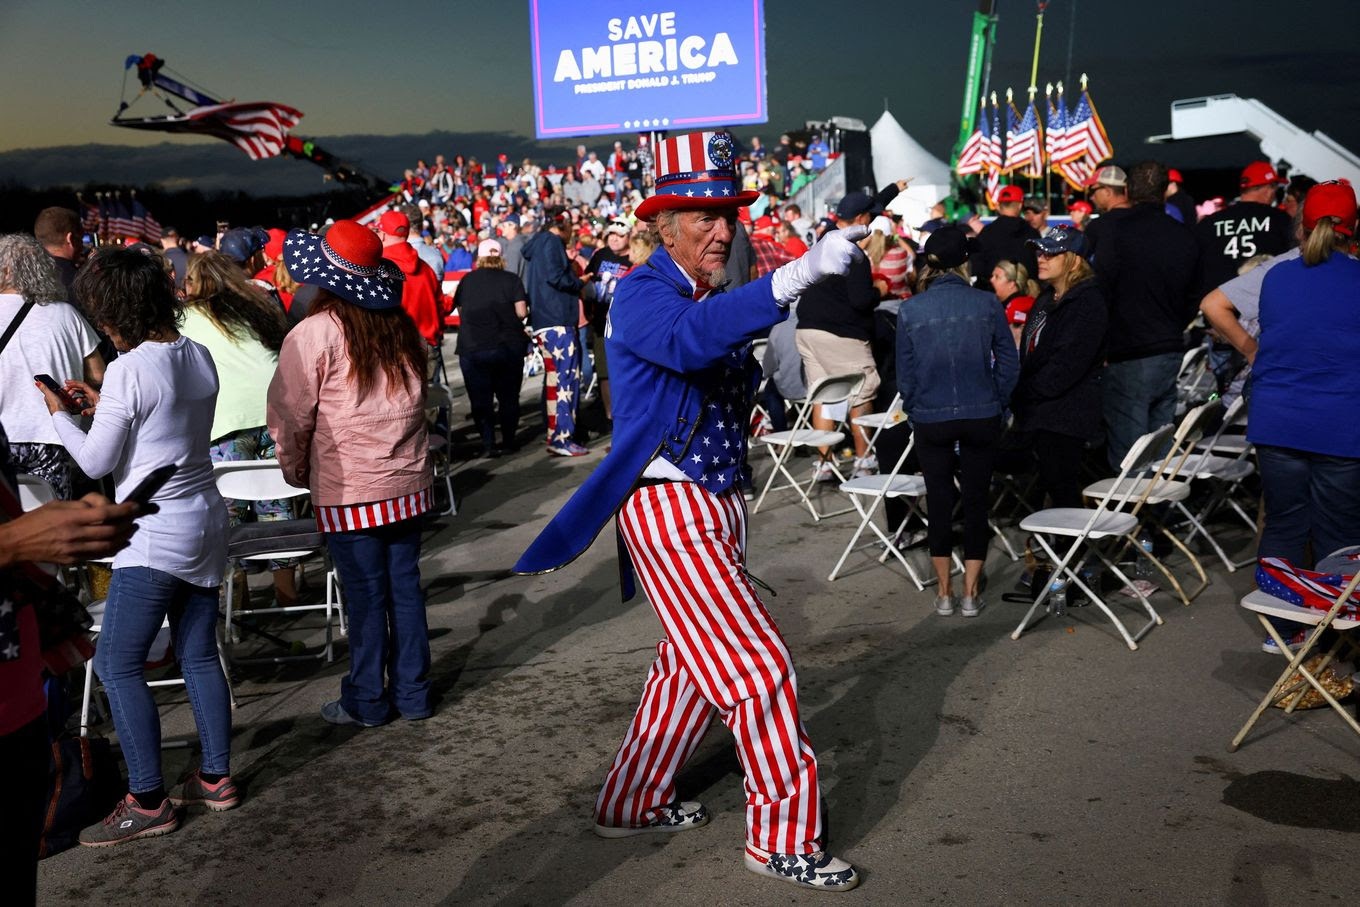 A person dressed as Uncle Sam attends a rally held by former president Donald Trump in support of Republican candidates in Latrobe, Pa., on Saturday. (Mike Segar/Reuters)